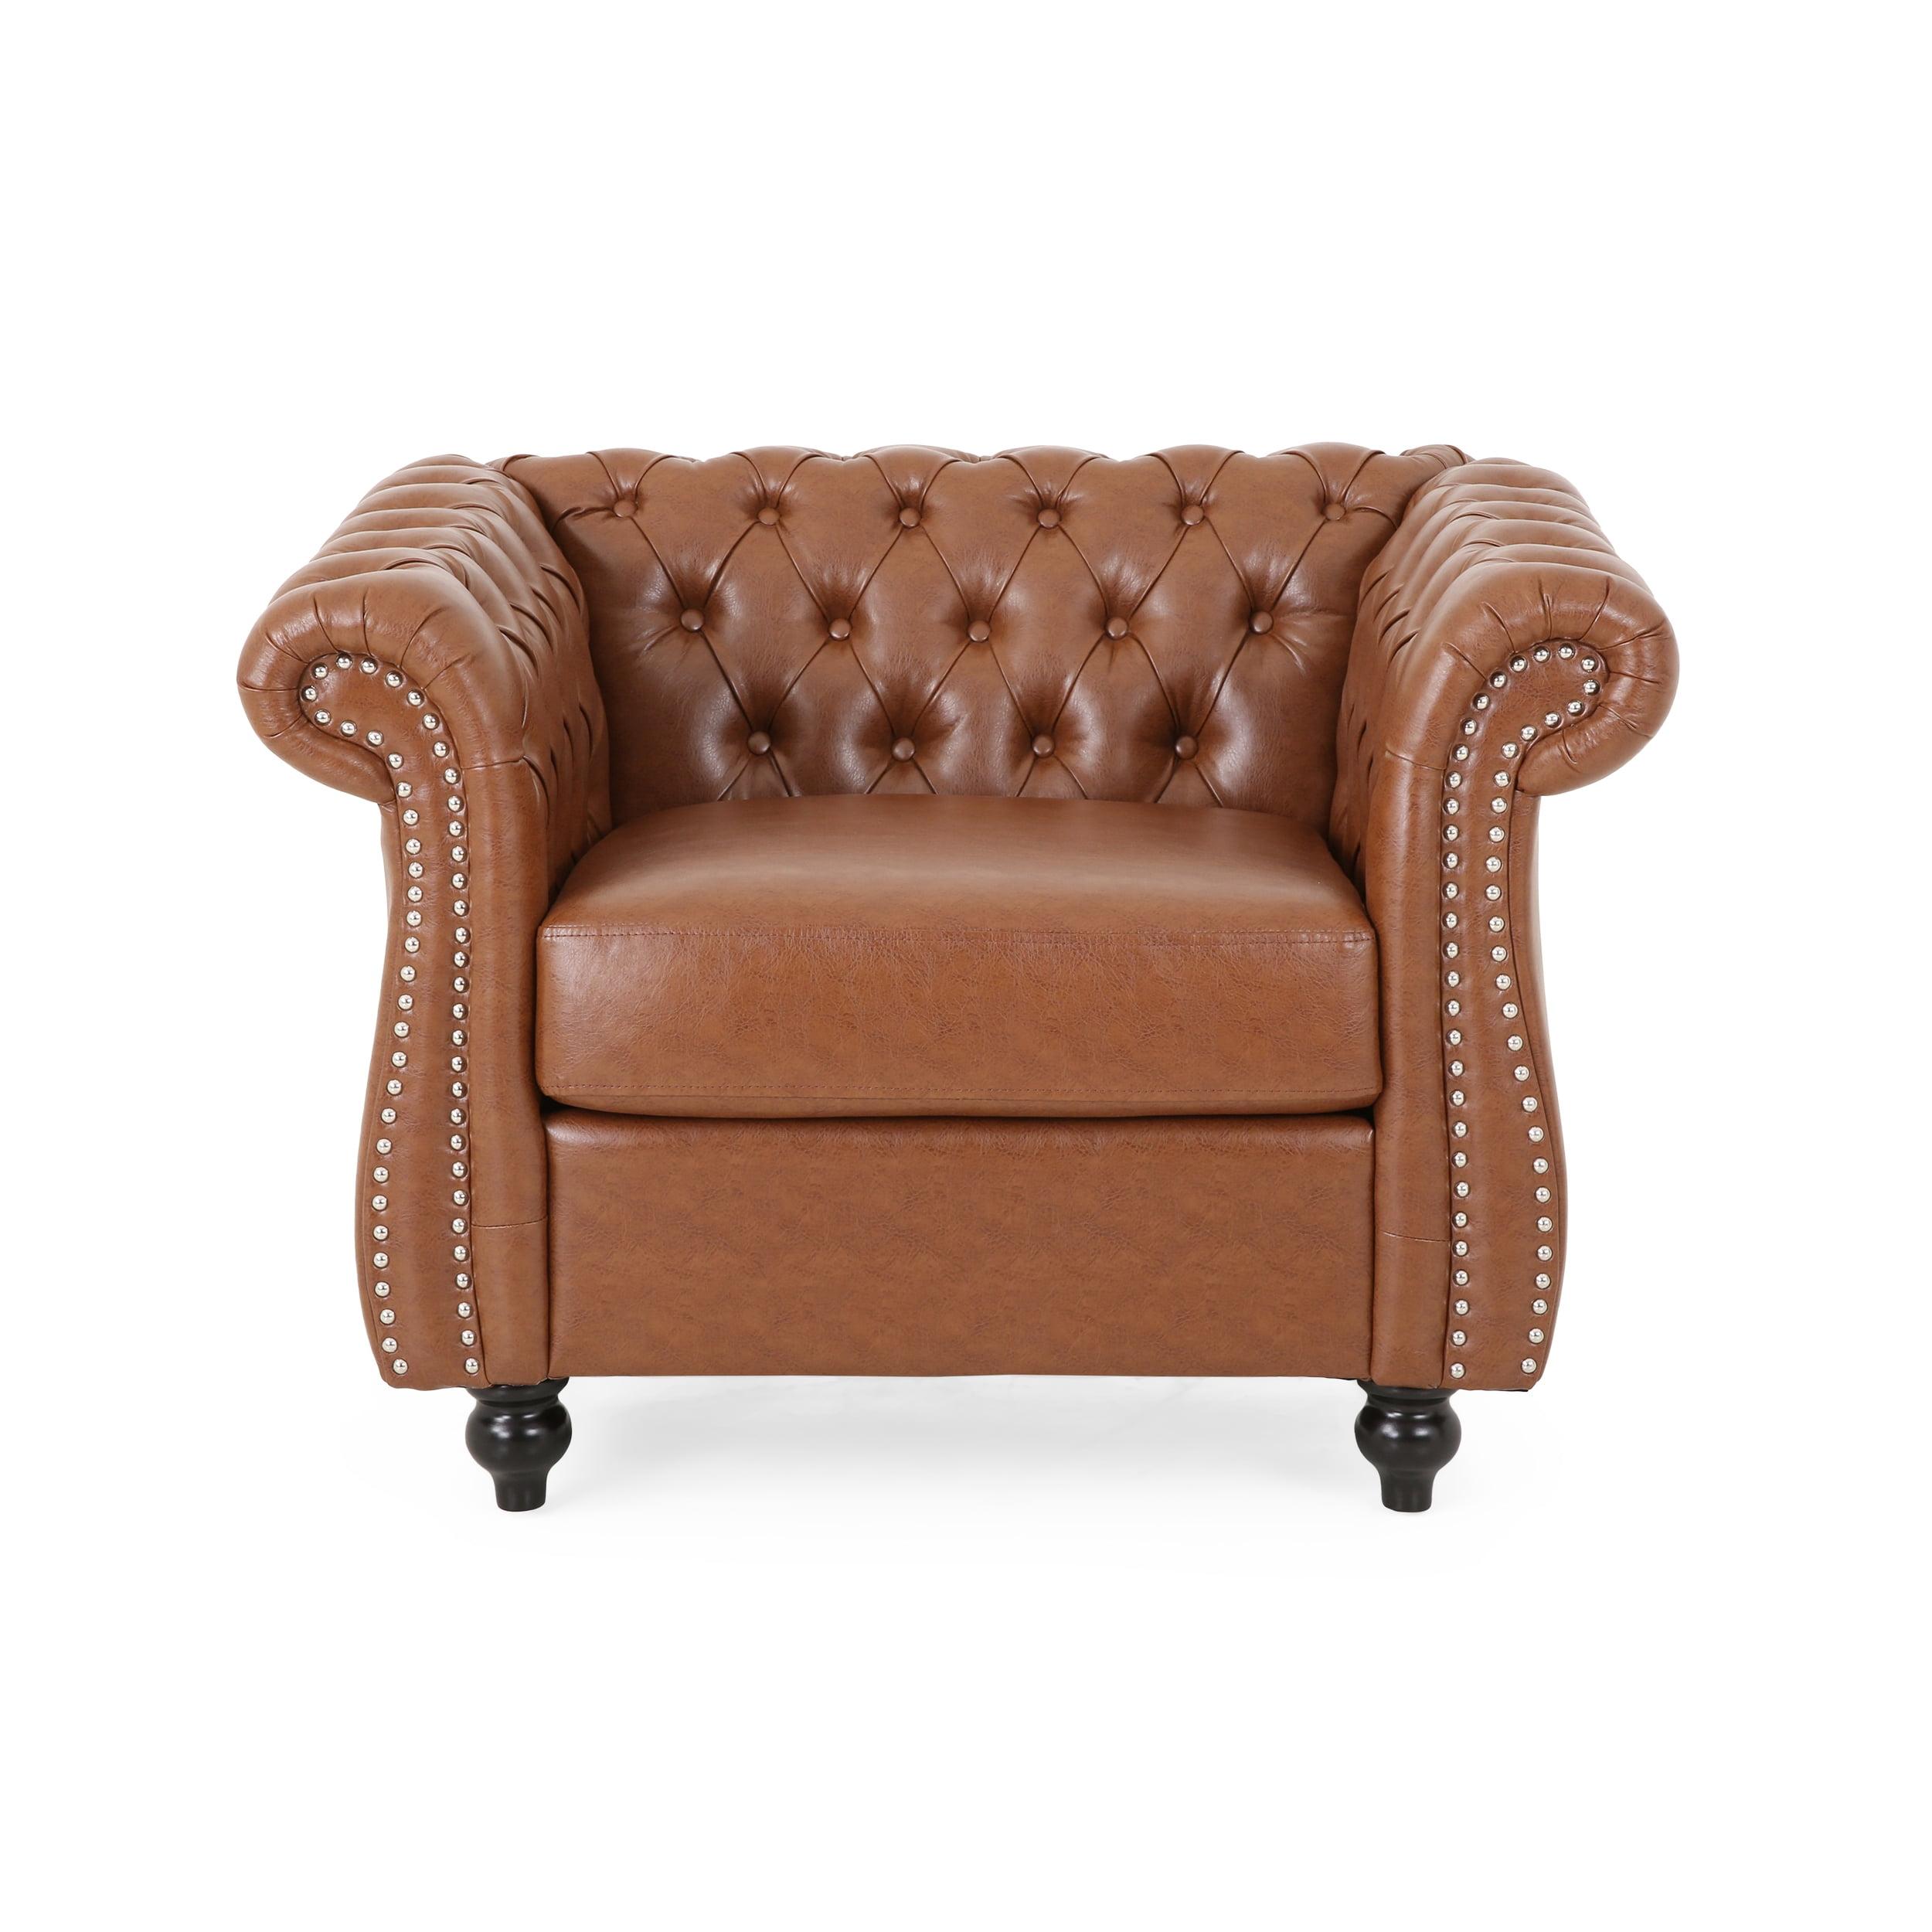 Cognac Brown Chesterfield Club Chair with Nailhead Accents